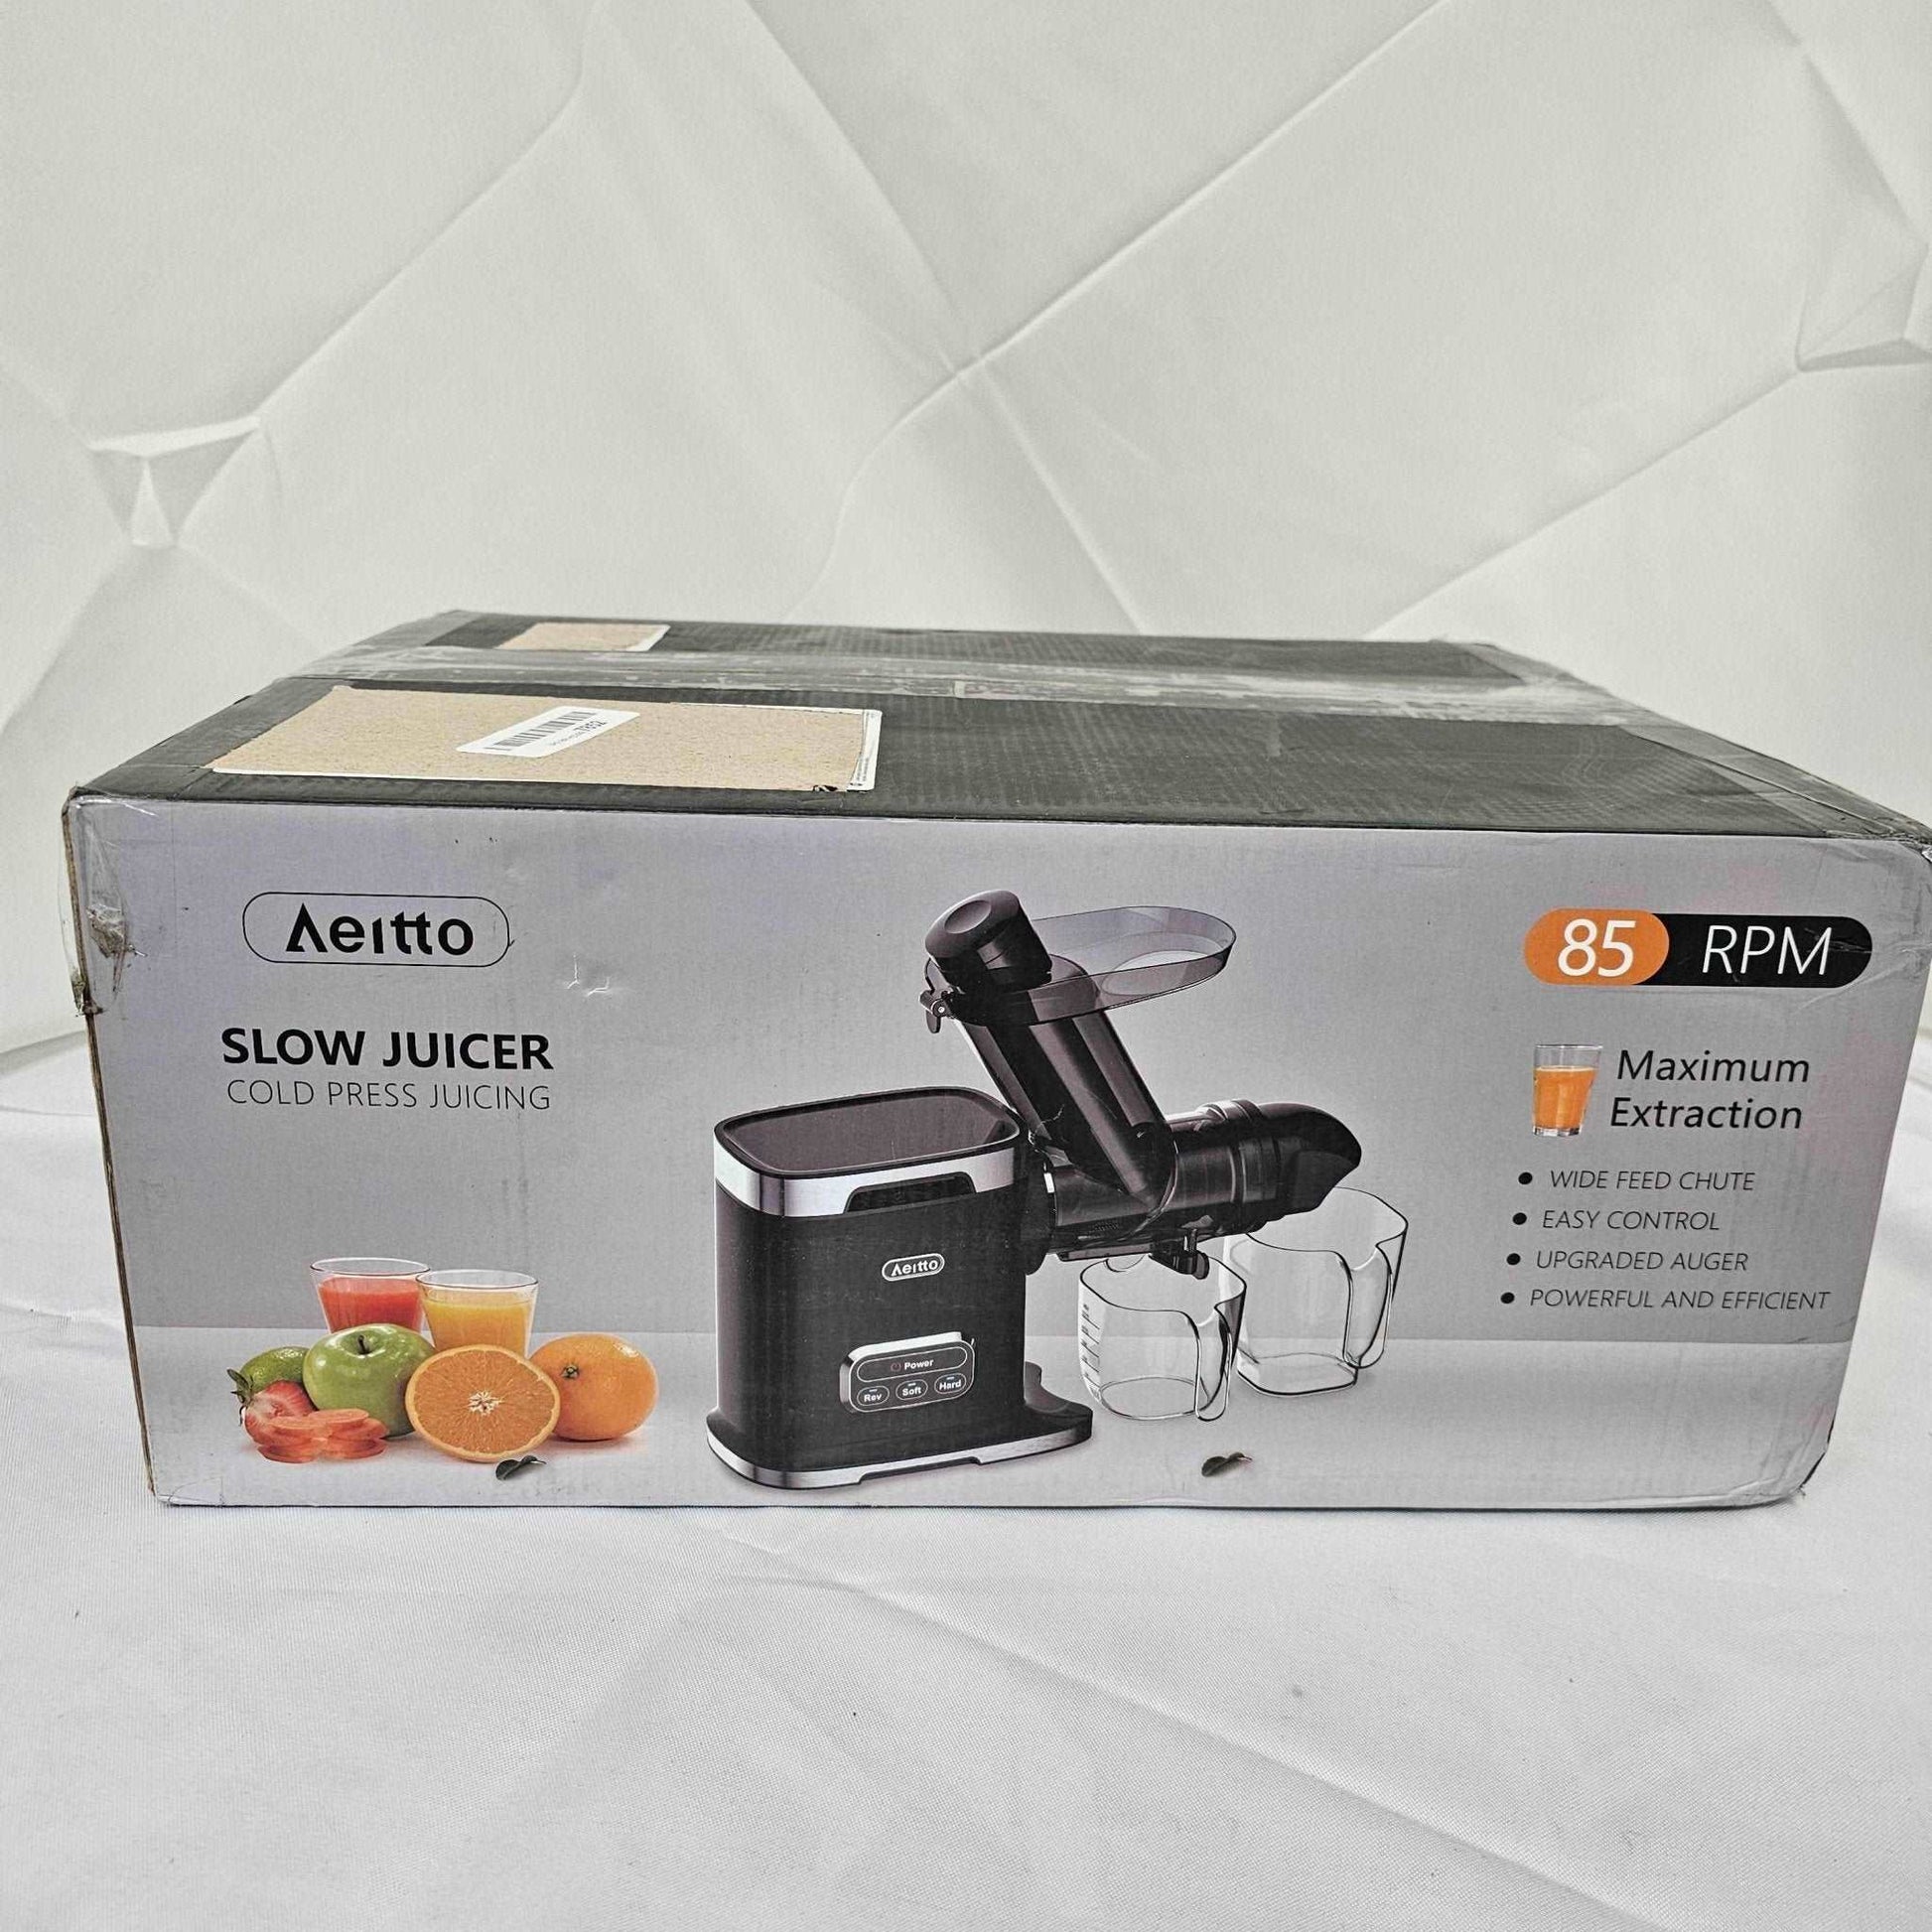 Aeitto Slow Juicer Cold Press Juicing - DQ Distribution